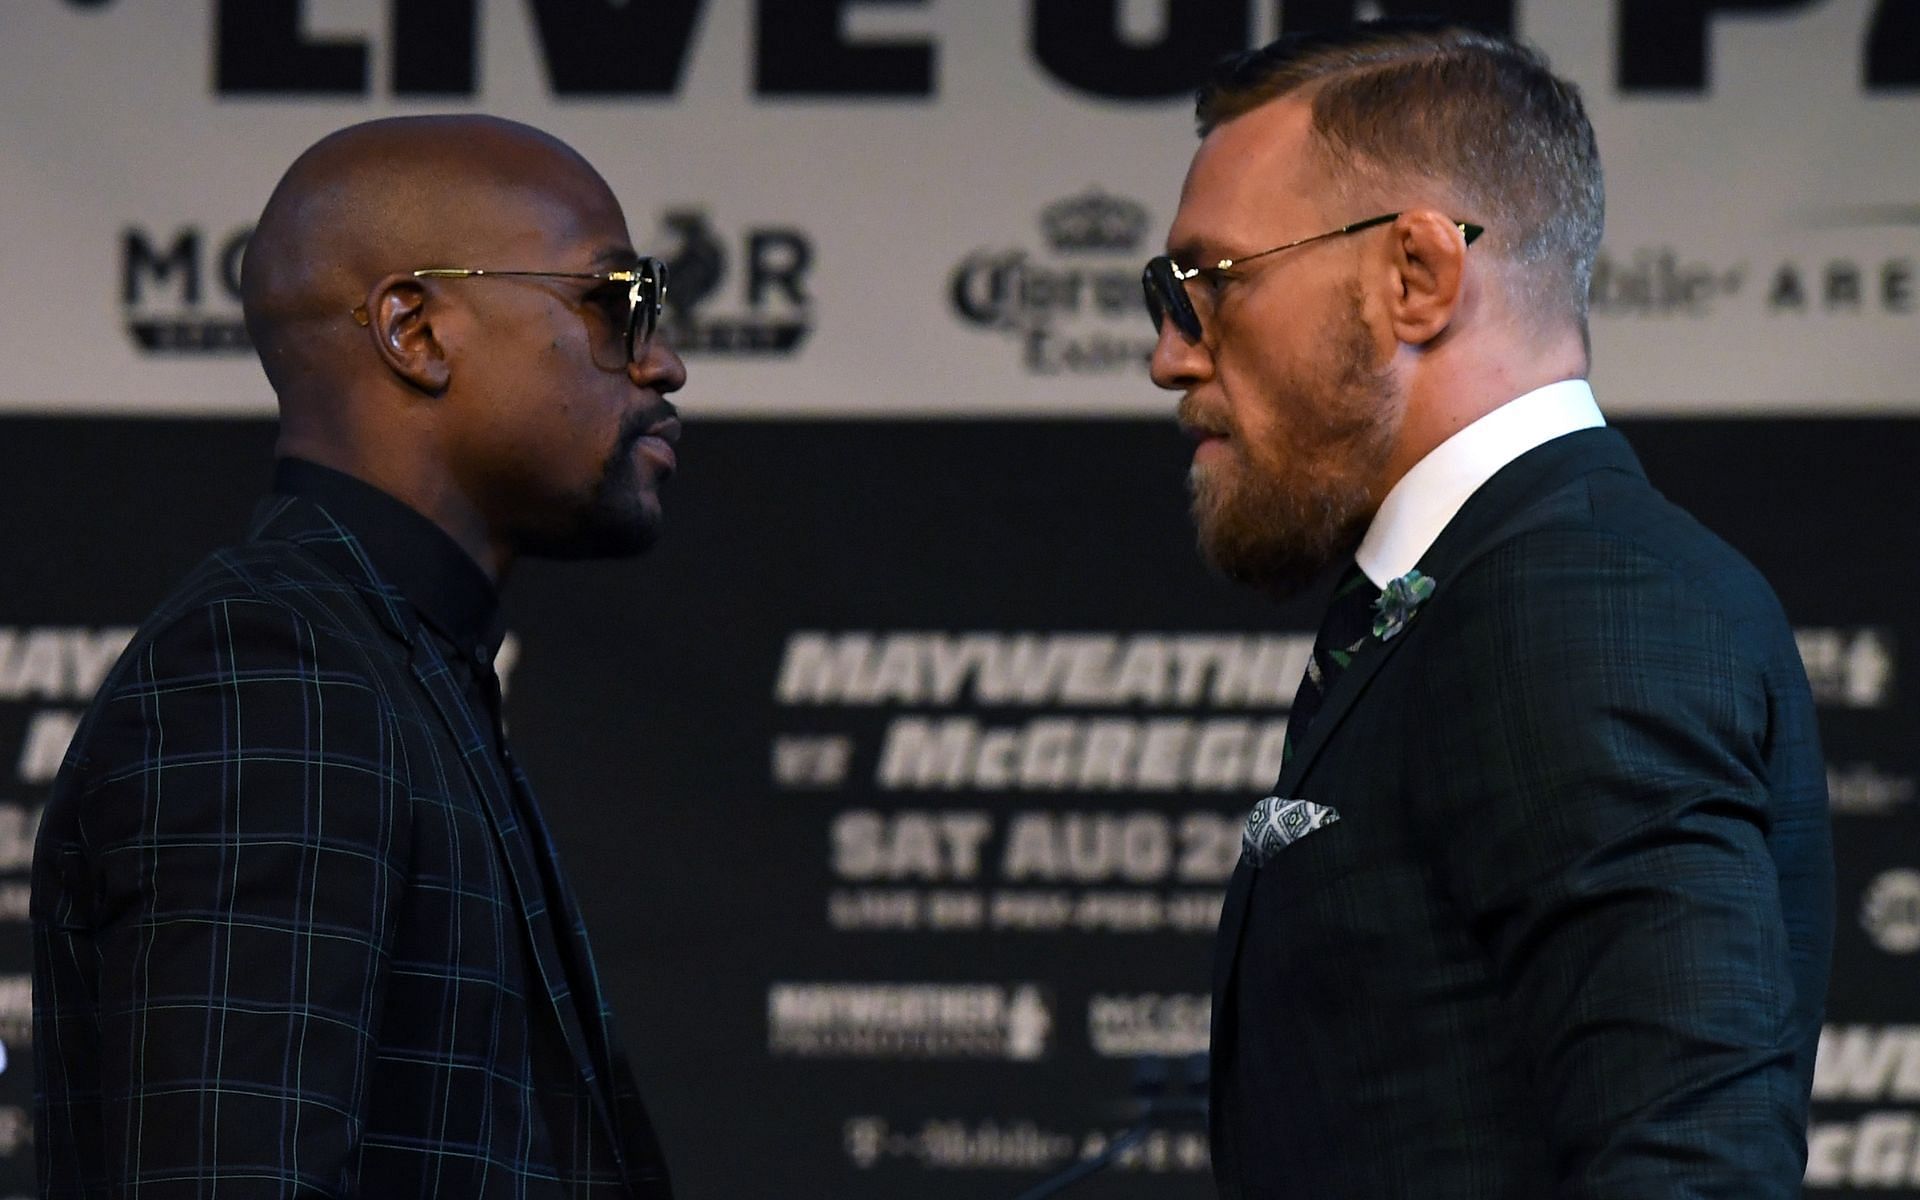 Floyd Mayweather (left) and Conor McGregor (right). [Image courtesy: Getty Images]